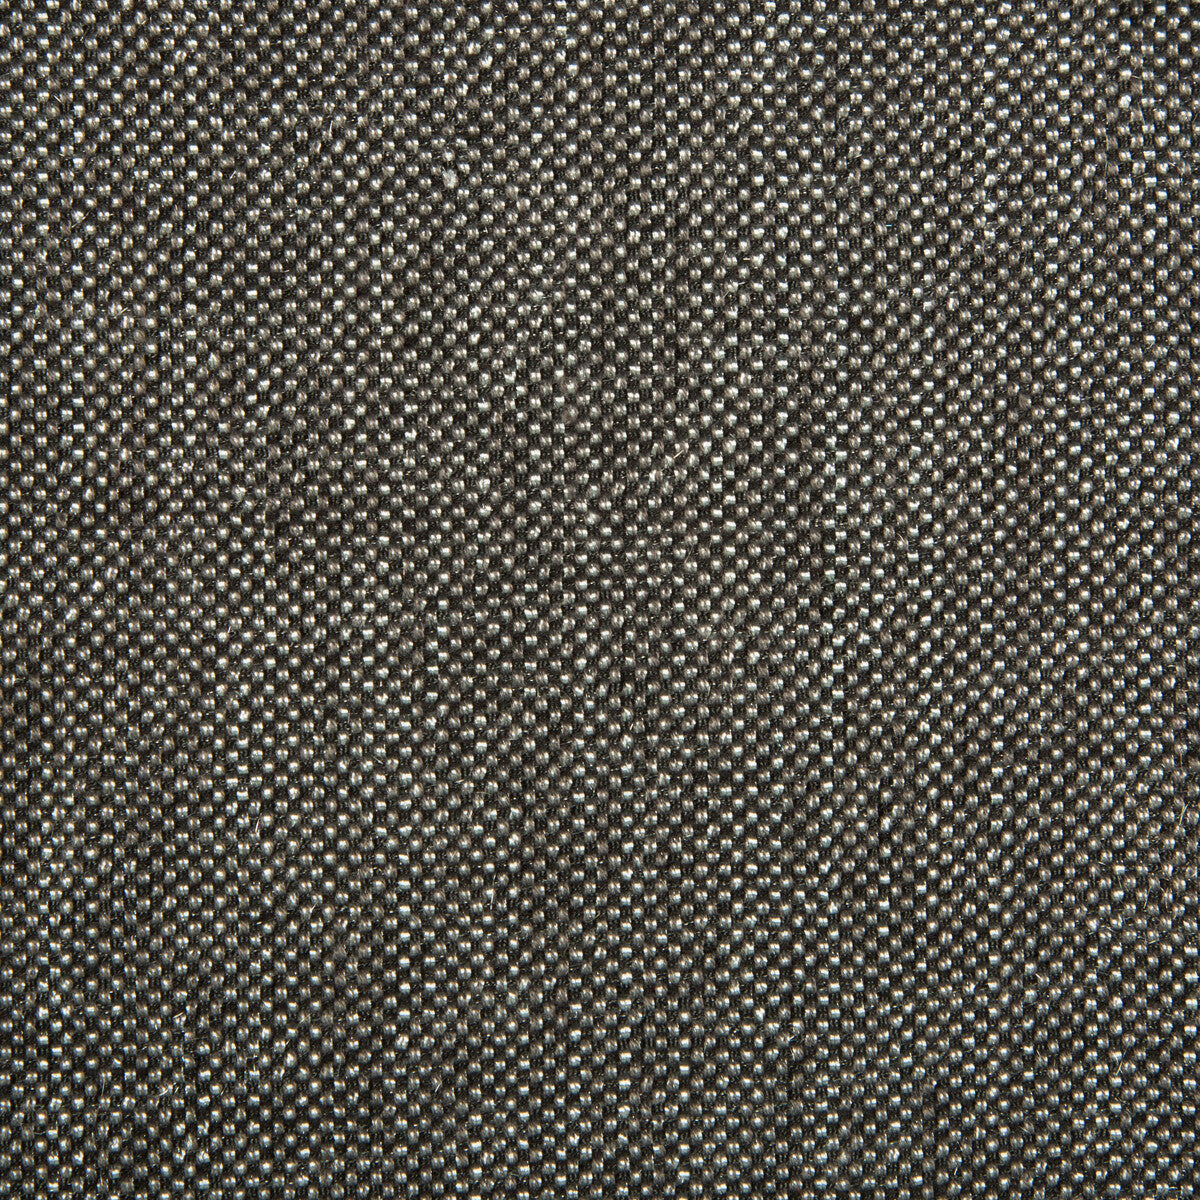 Kravet Contract fabric in 34926-811 color - pattern 34926.811.0 - by Kravet Contract